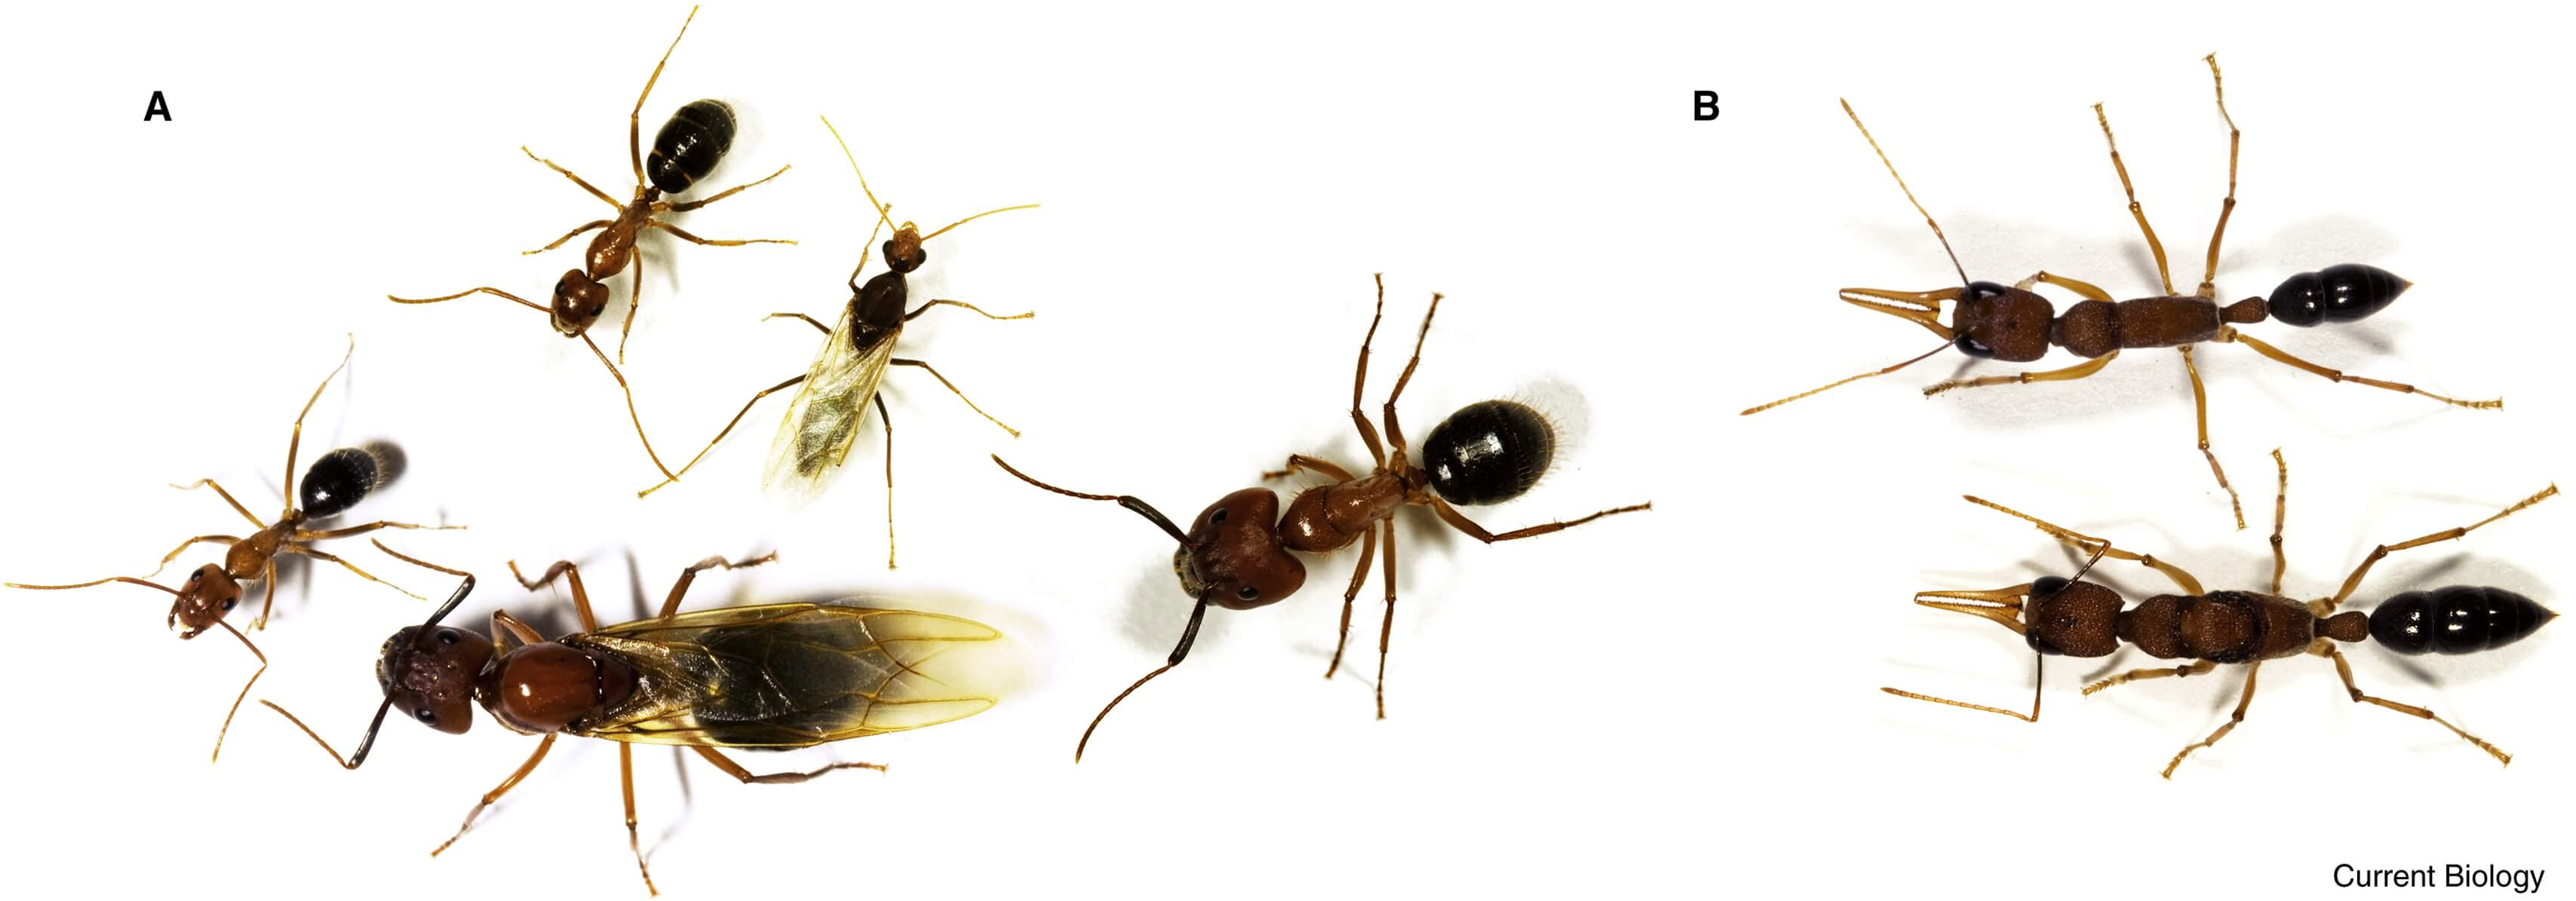 Specialization and flexibility in ant castes